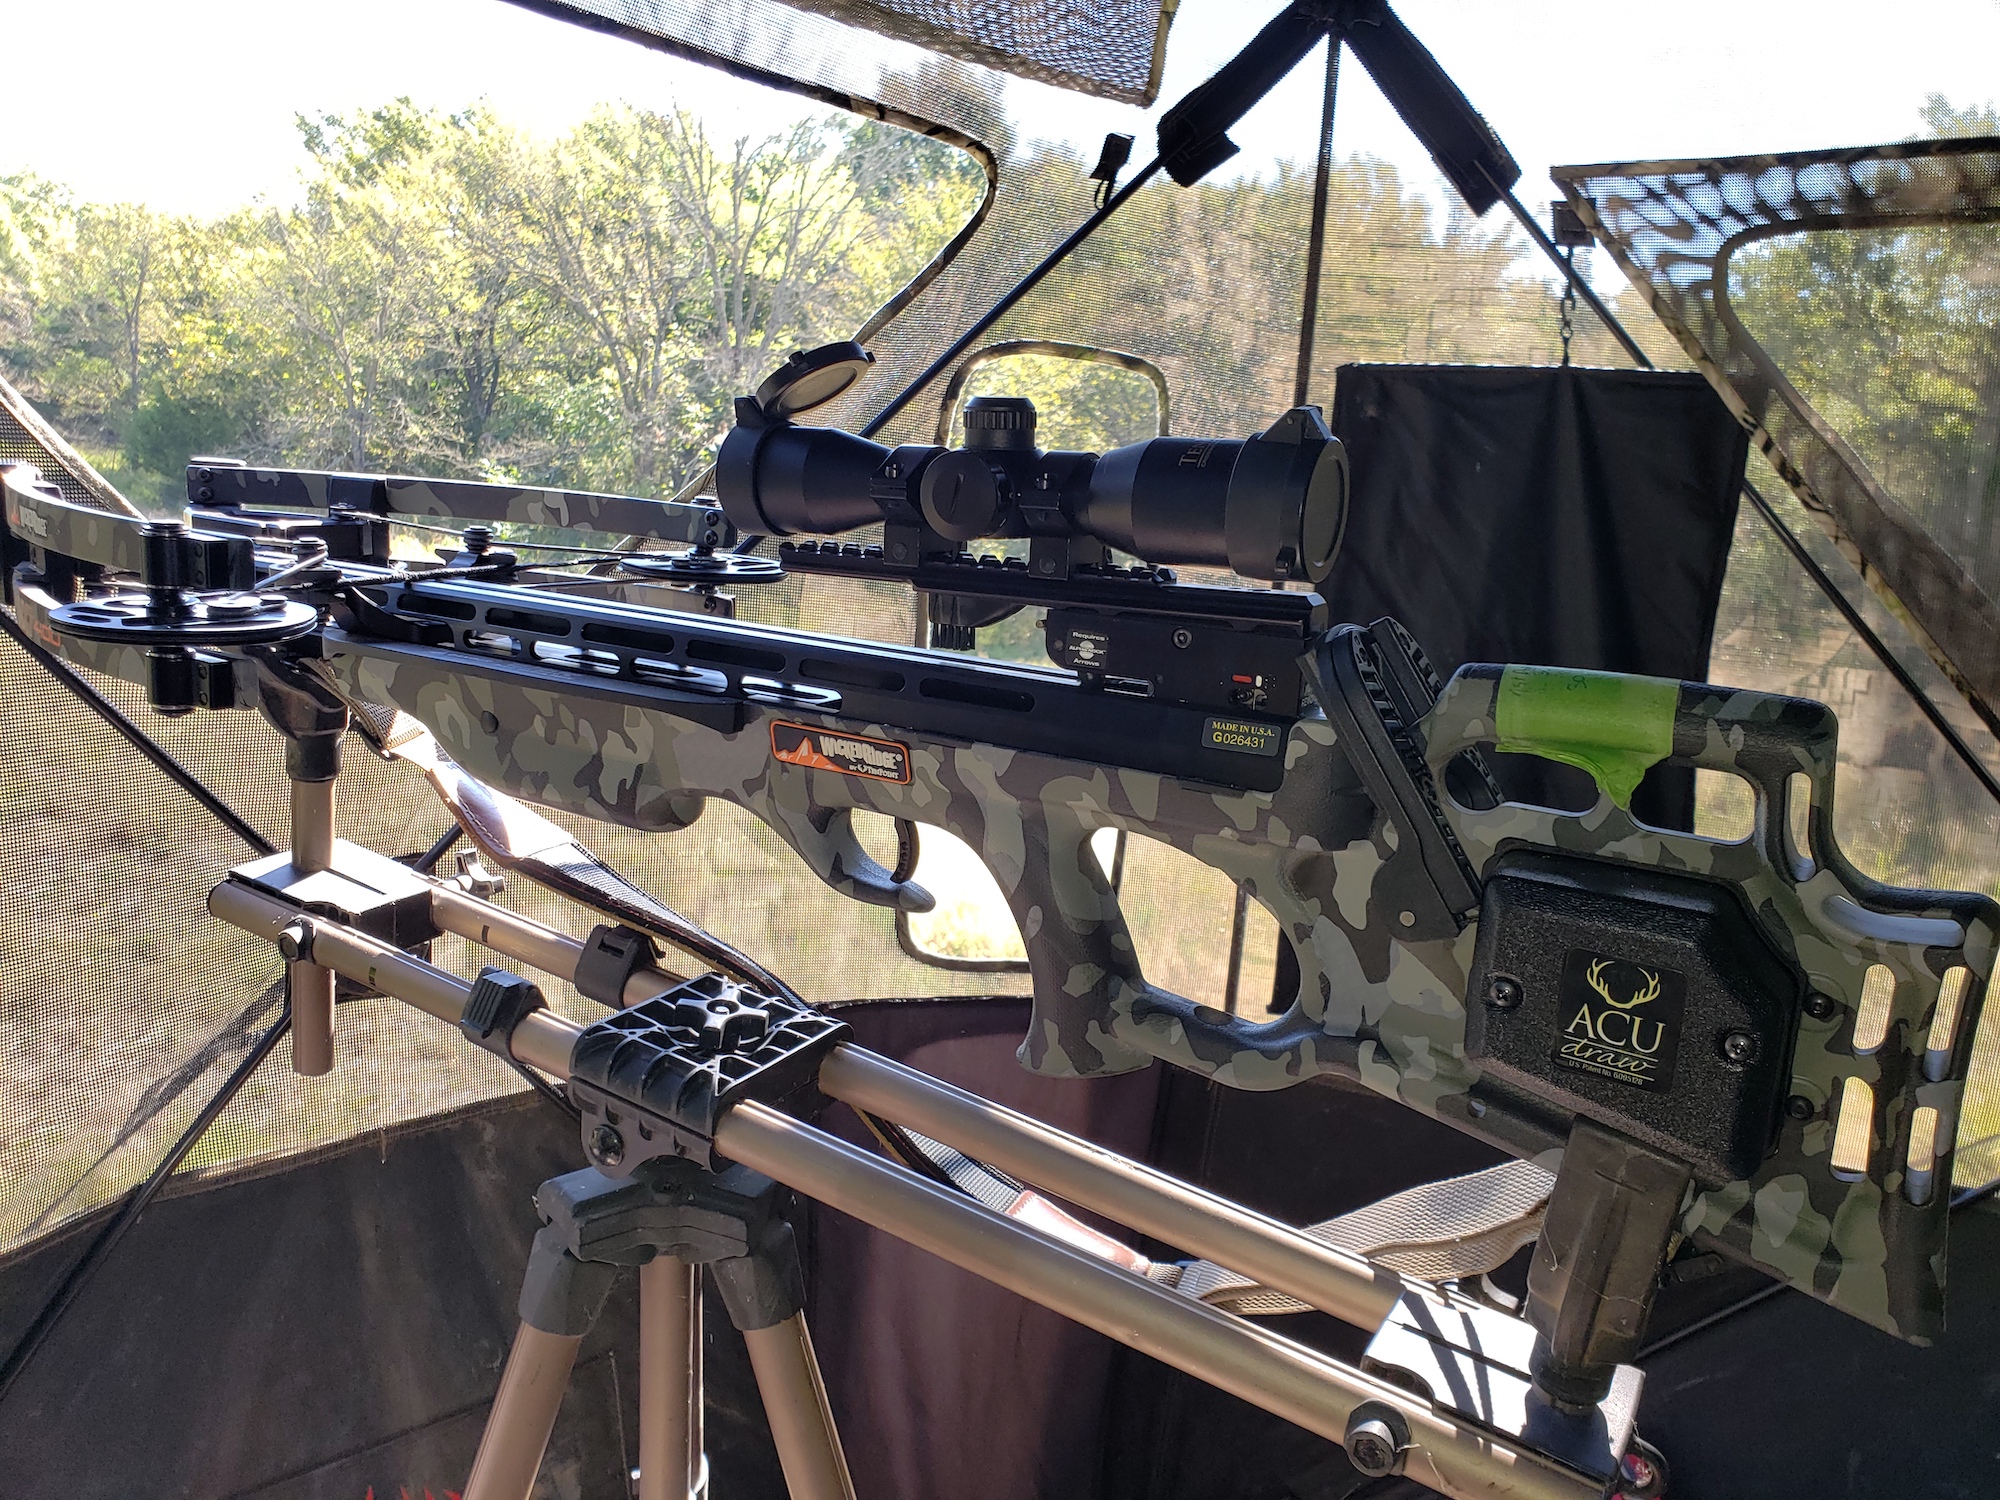 A black crossbow set up in a hunting blind